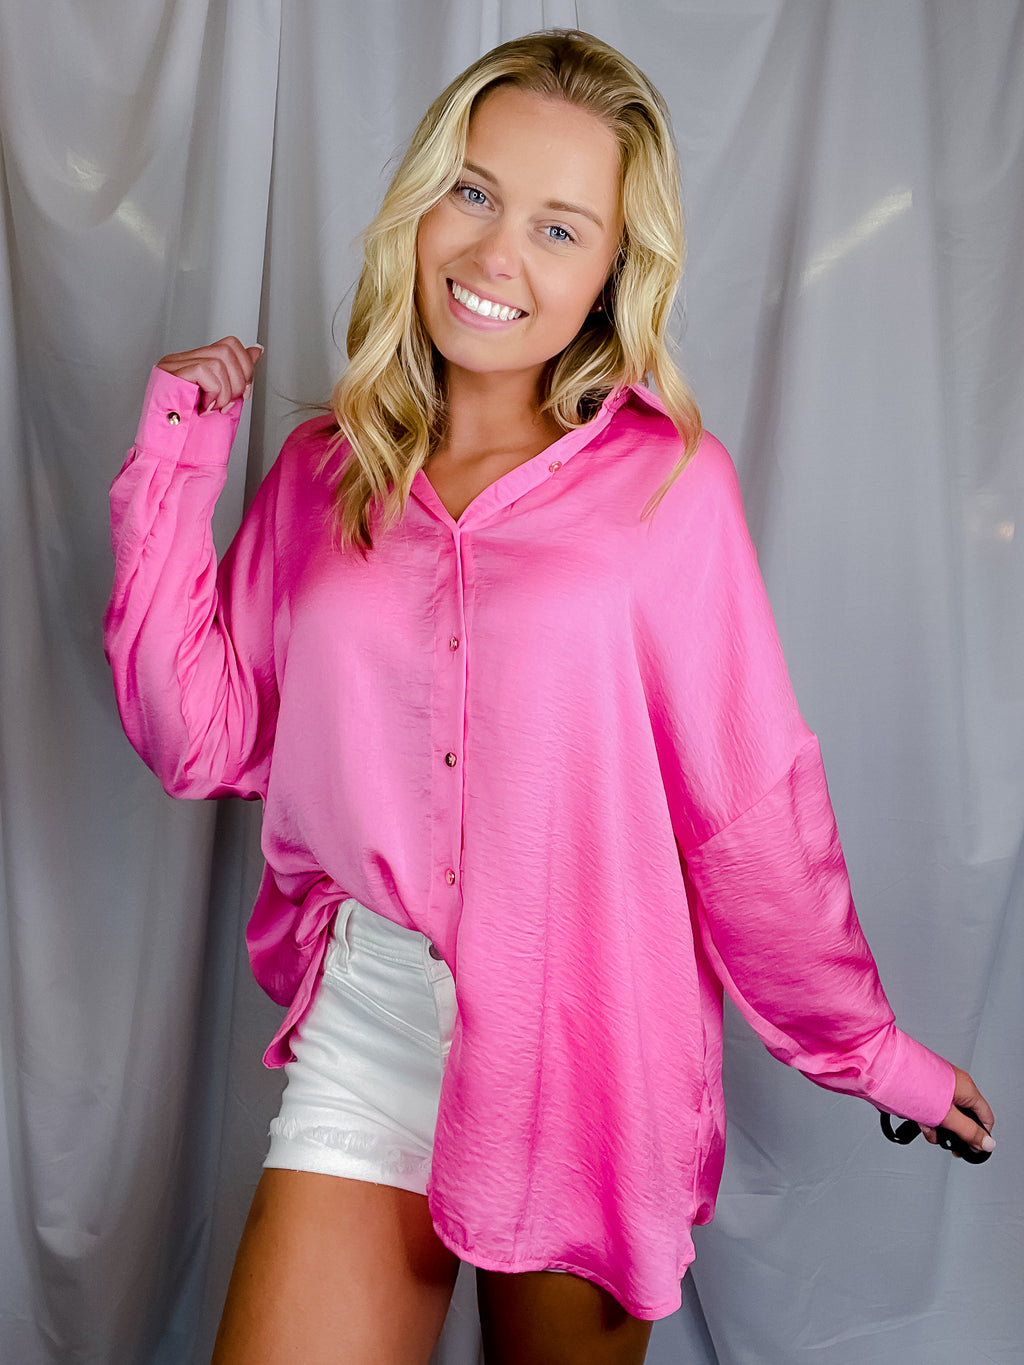 Top features solid base color, long sleeves, button down fit, thin material and runs true to size!-hot pink